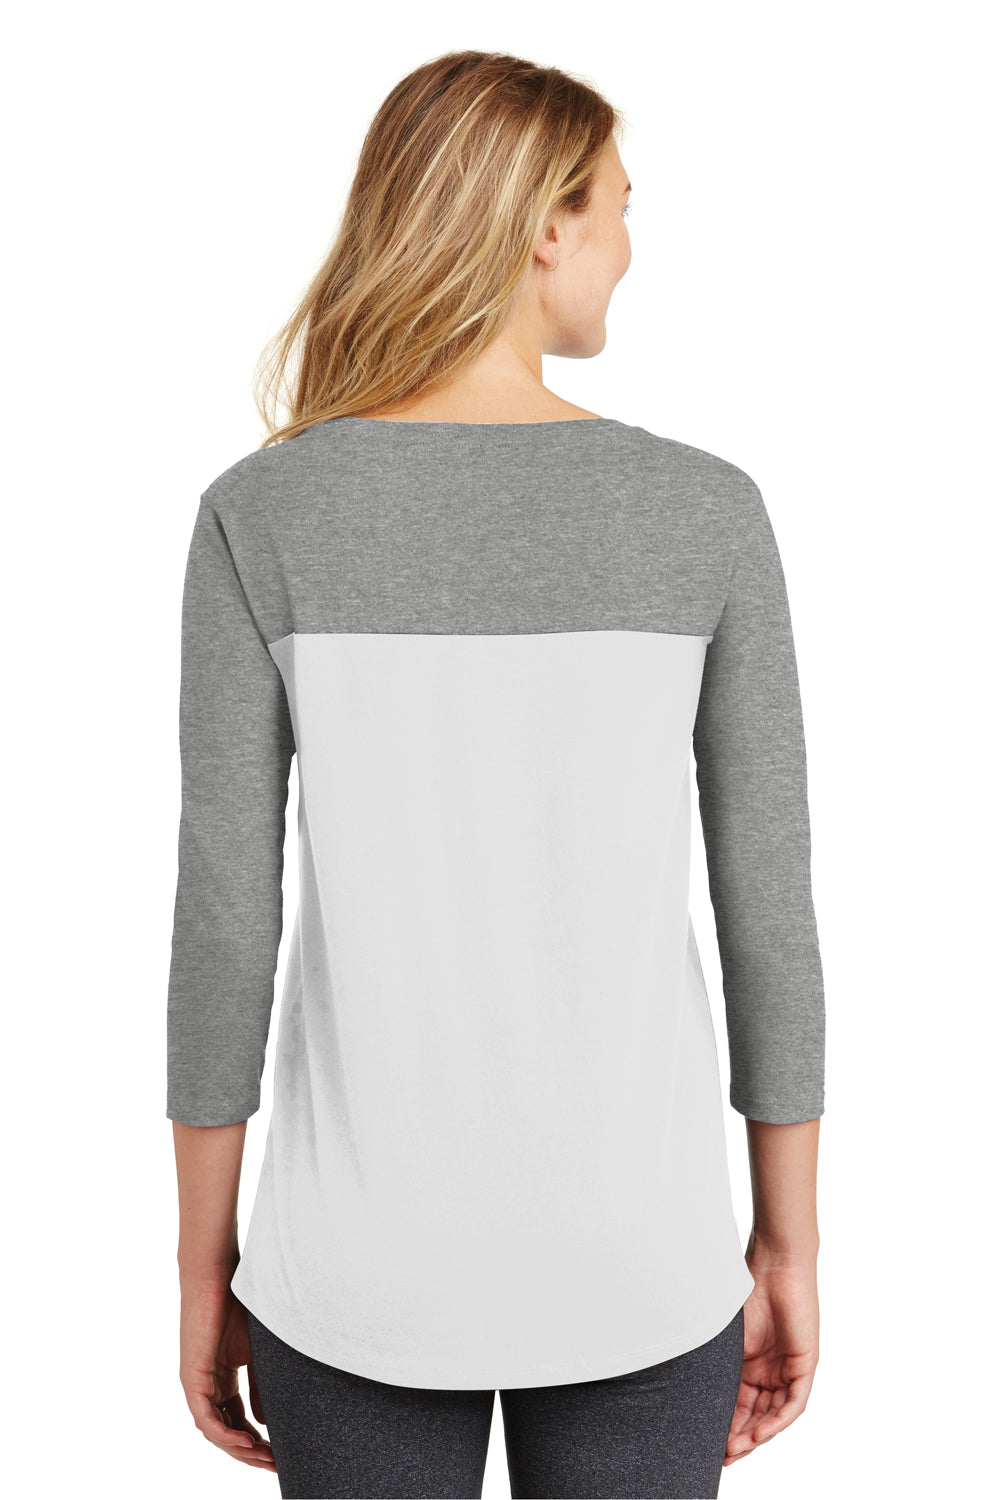 District DT2700 Womens Rally 3/4 Sleeve Wide Neck T-Shirt White/Grey Back